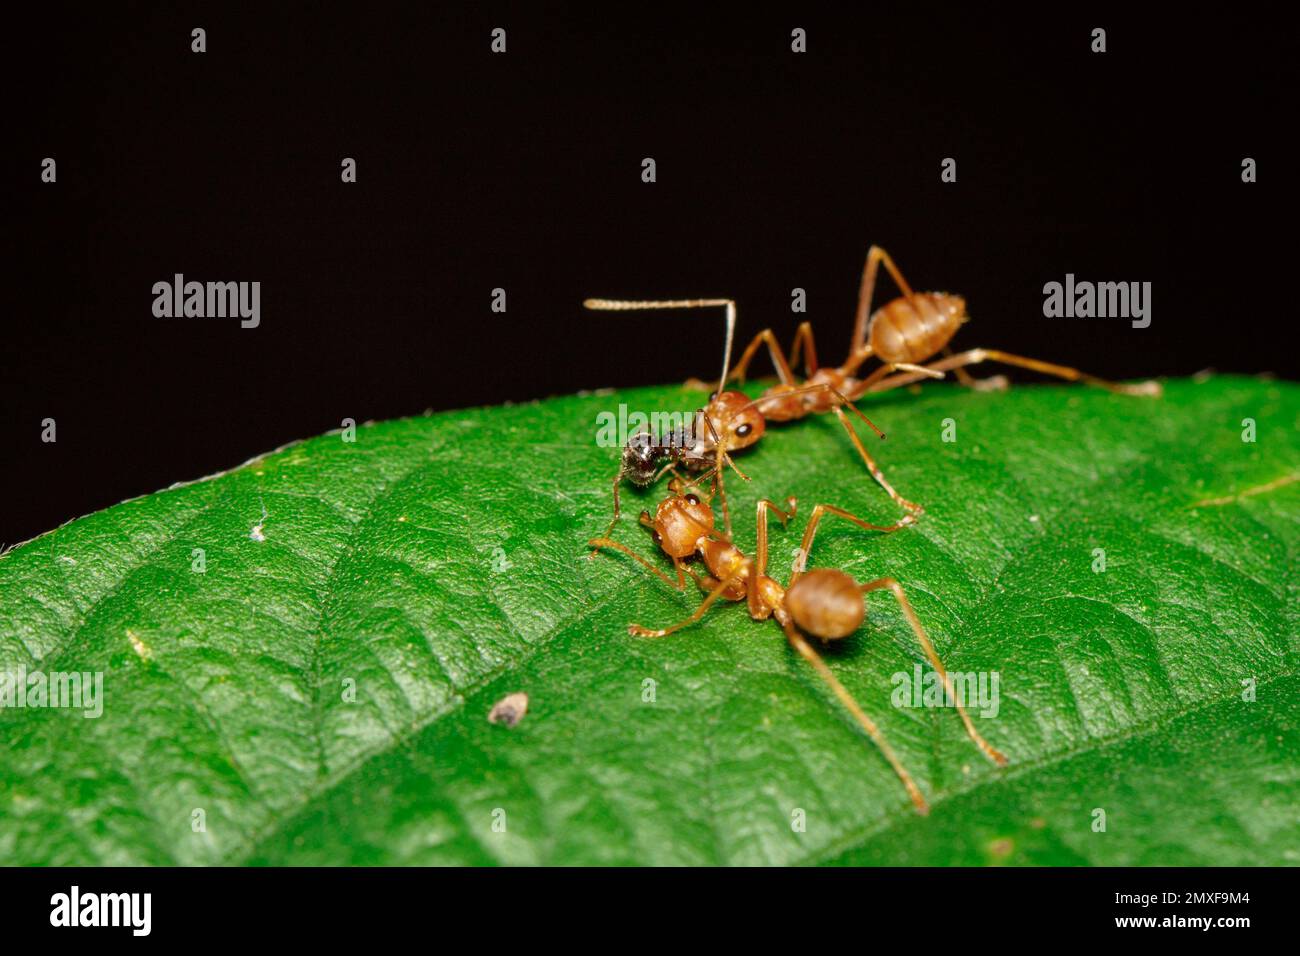 Image of red ant(Oecophylla smaragdina) on the green leaf. Insect. Animal Stock Photo